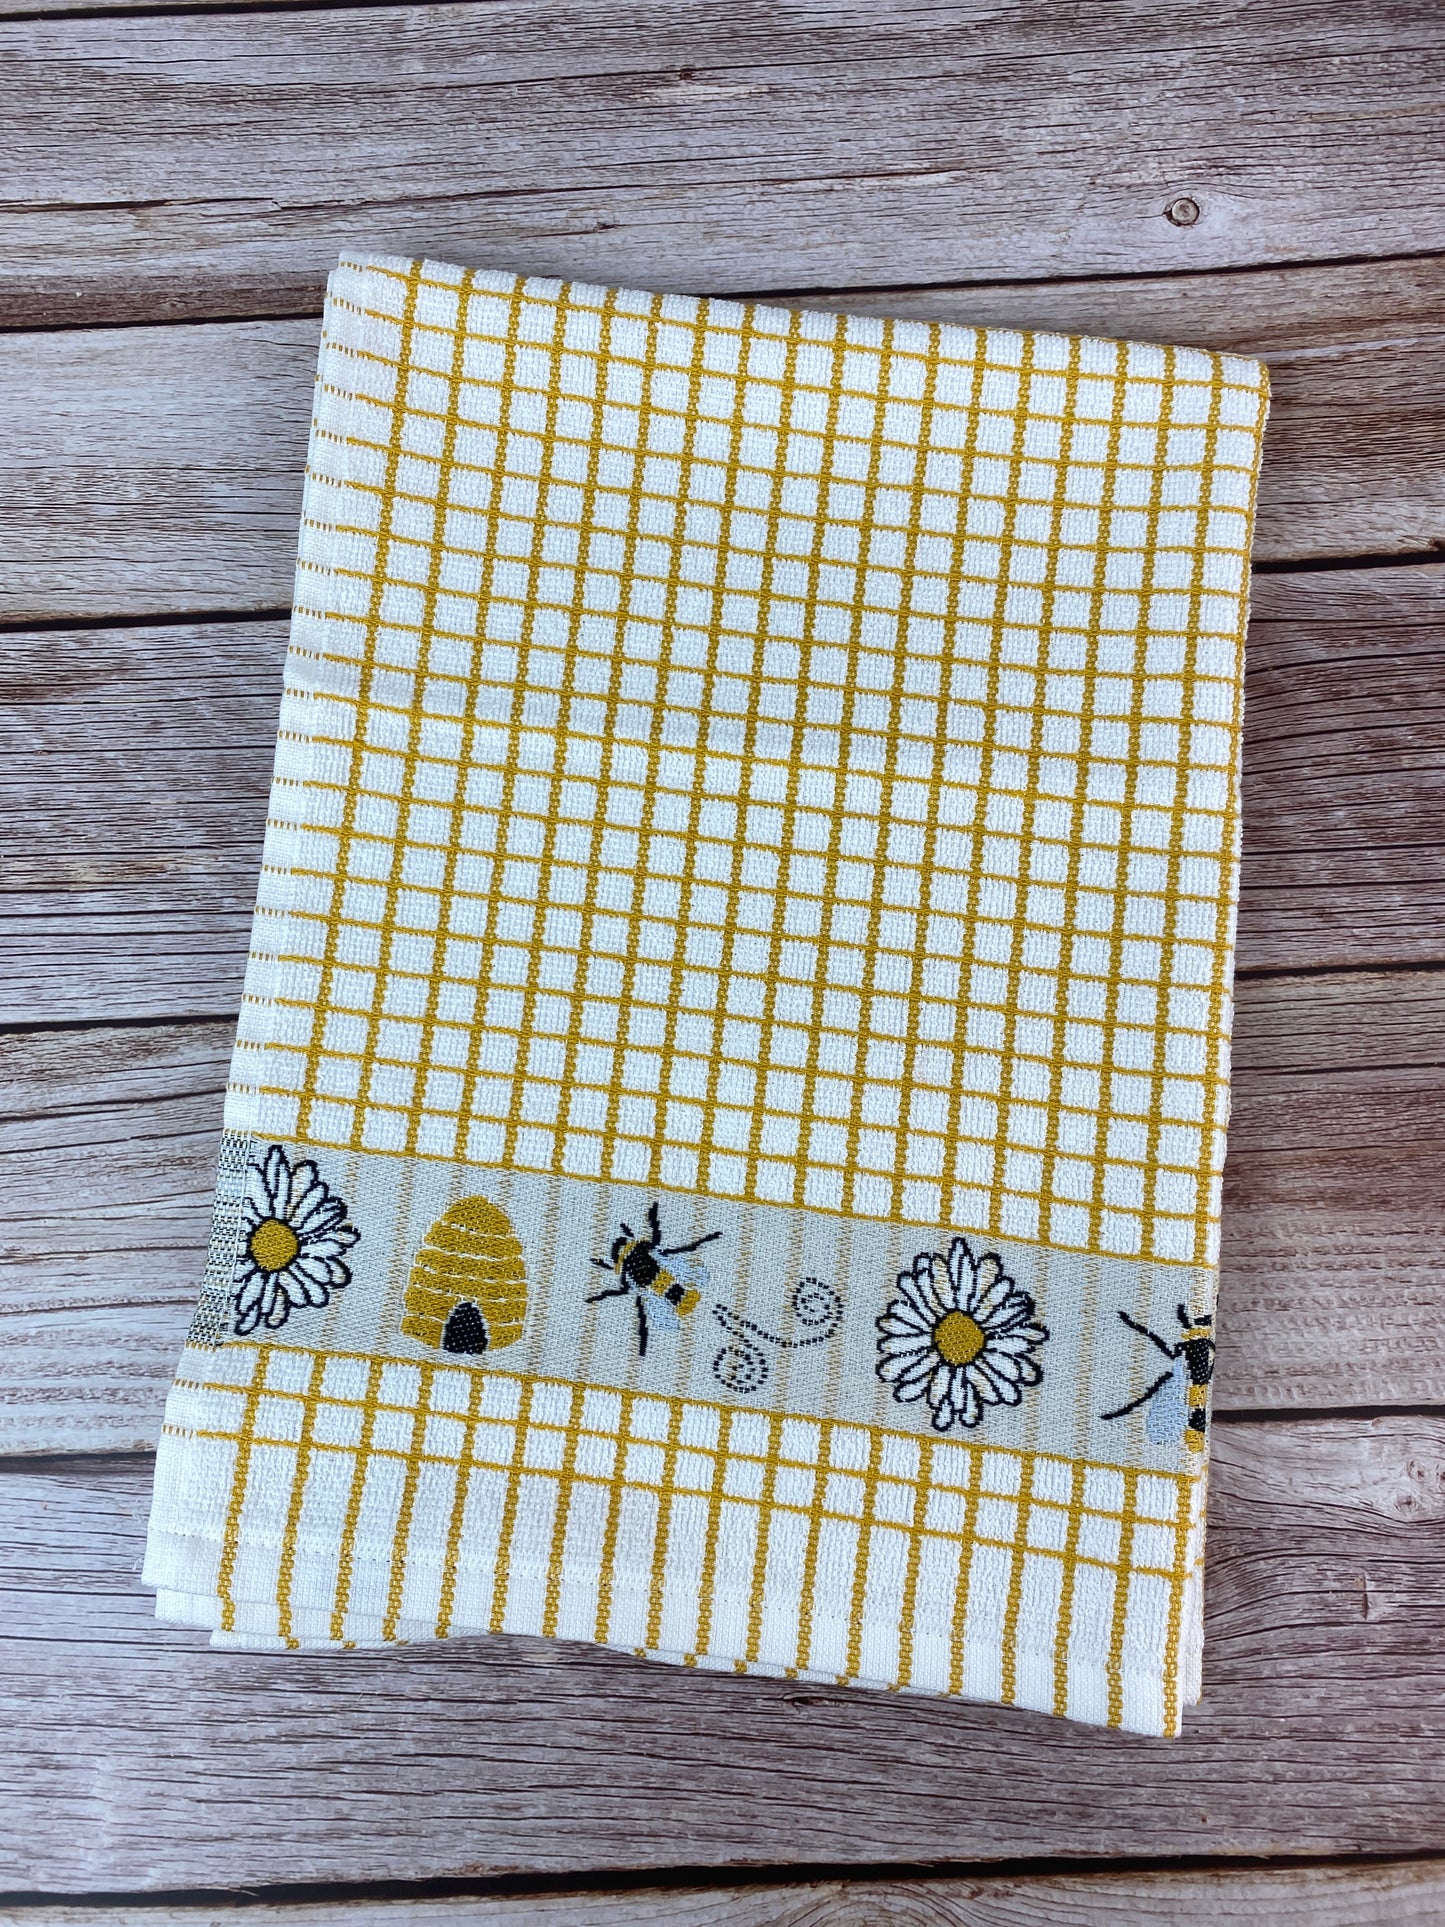 100% Cotton Towel - Bees and Daisies